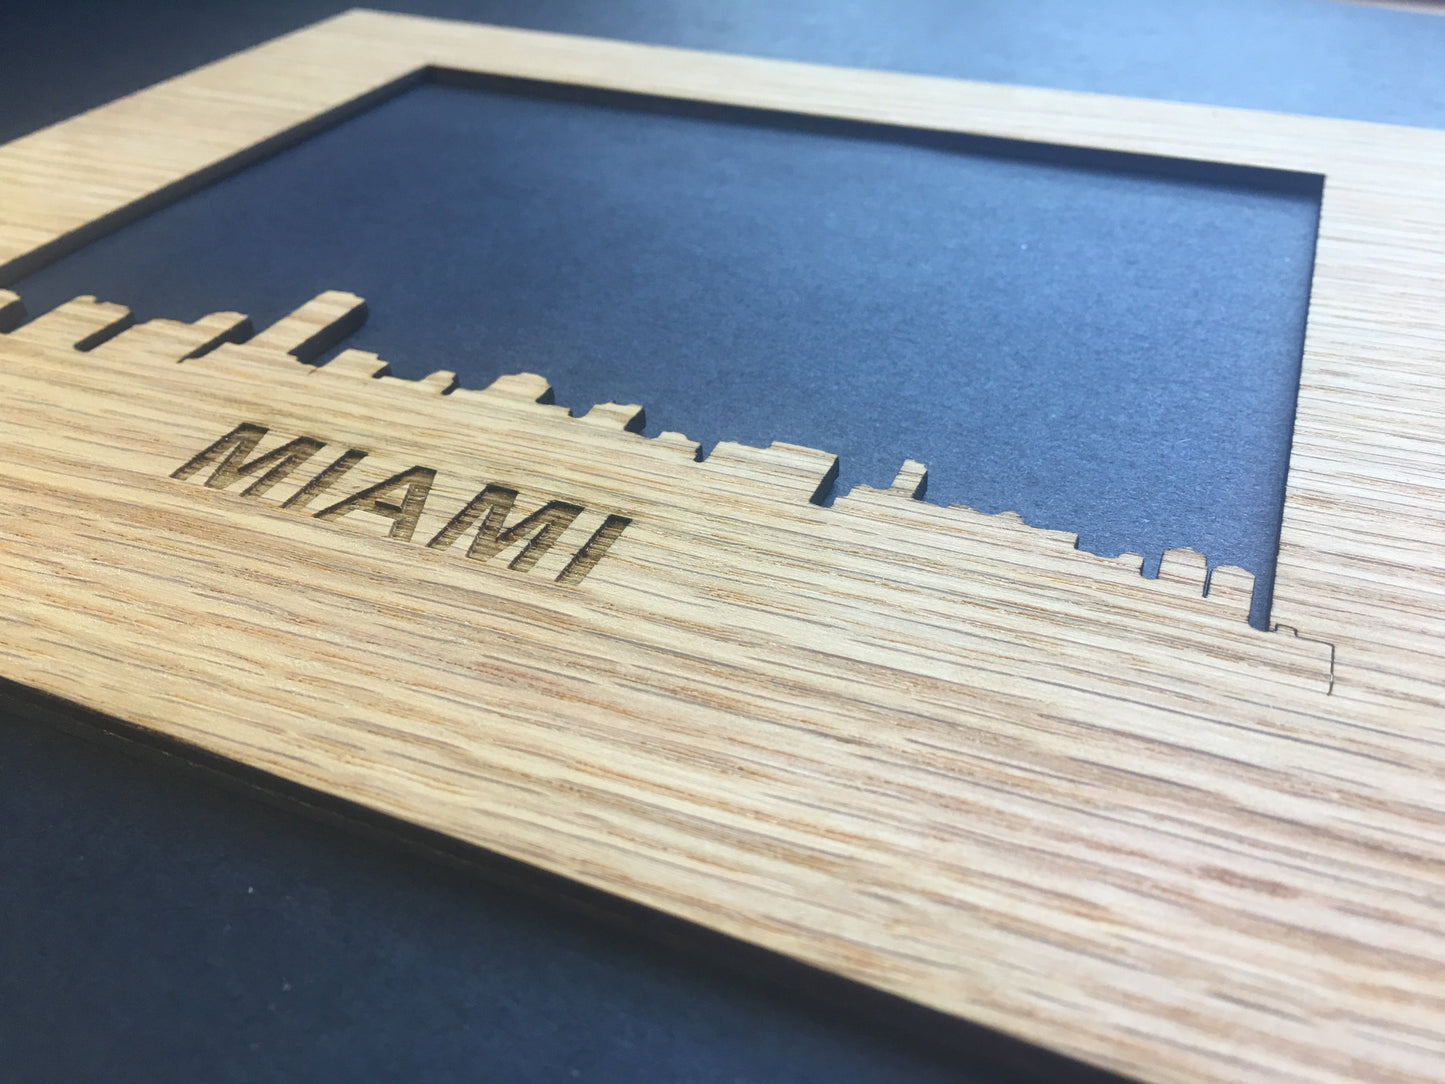 8x10 Miami Picture Frame, Picture Frame, home decor, laser engraved - Legacy Images